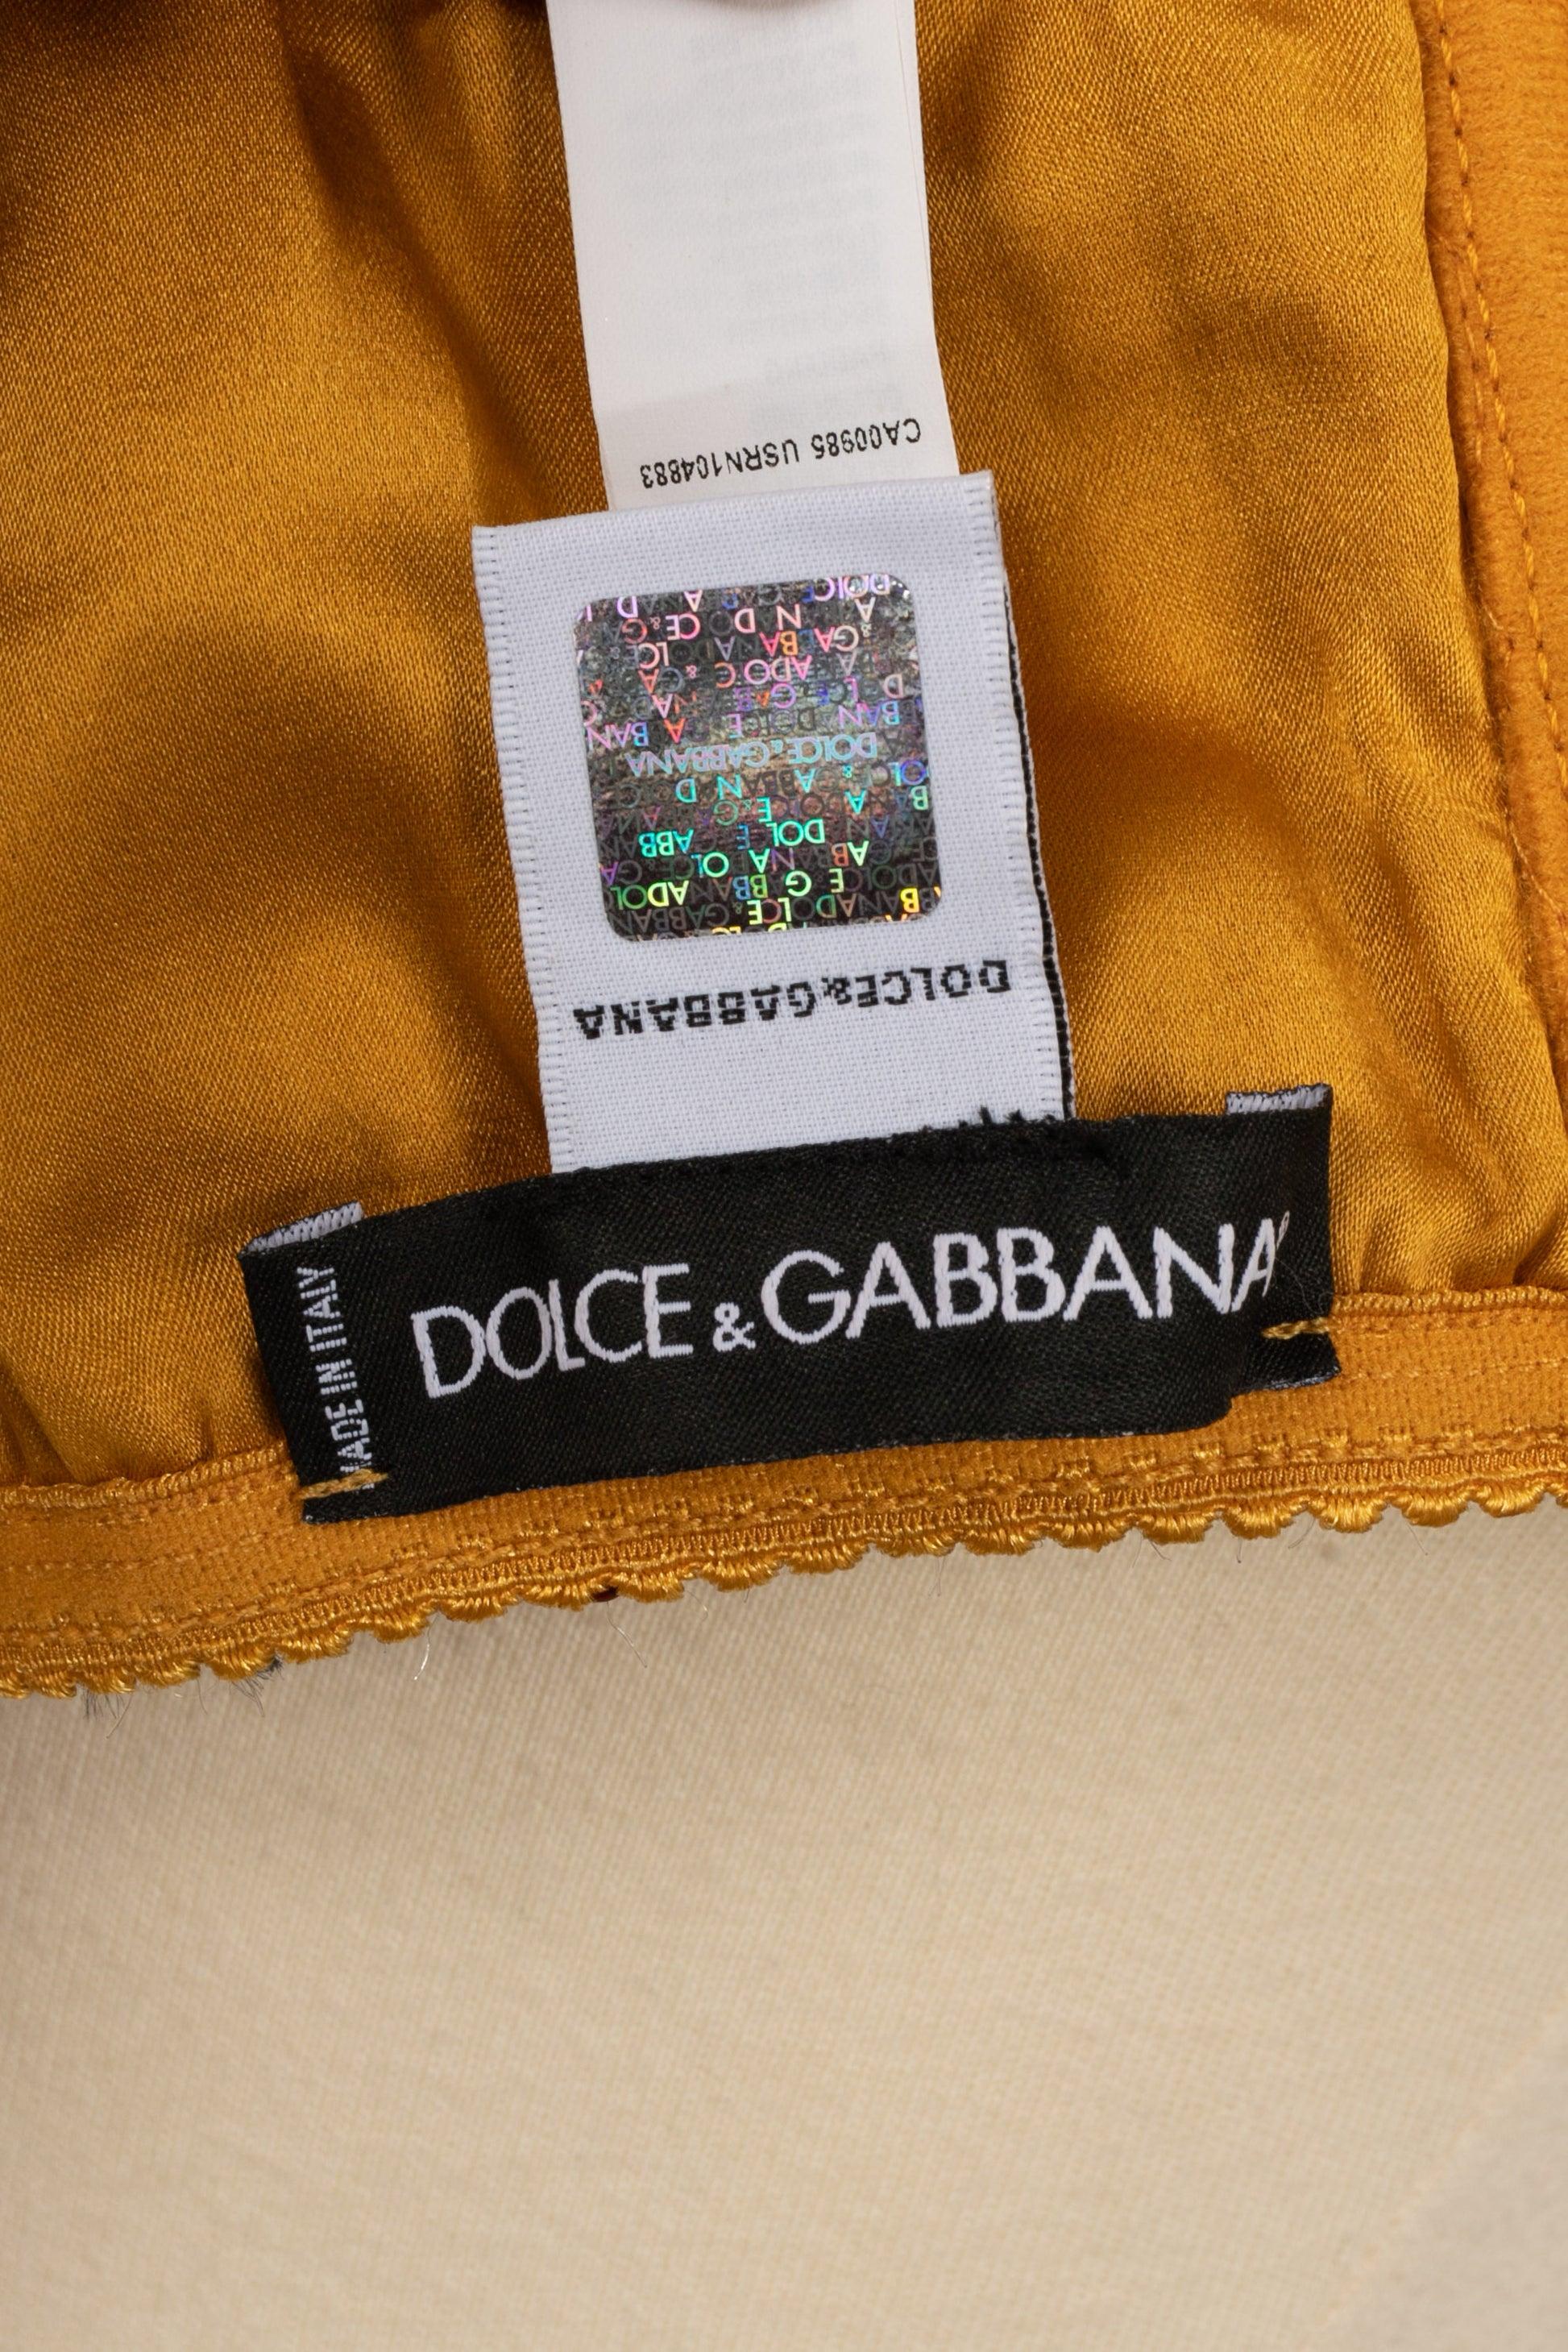 Dolce & Gabbana Entirely Embroidered Top with Orange Sequins For Sale 3